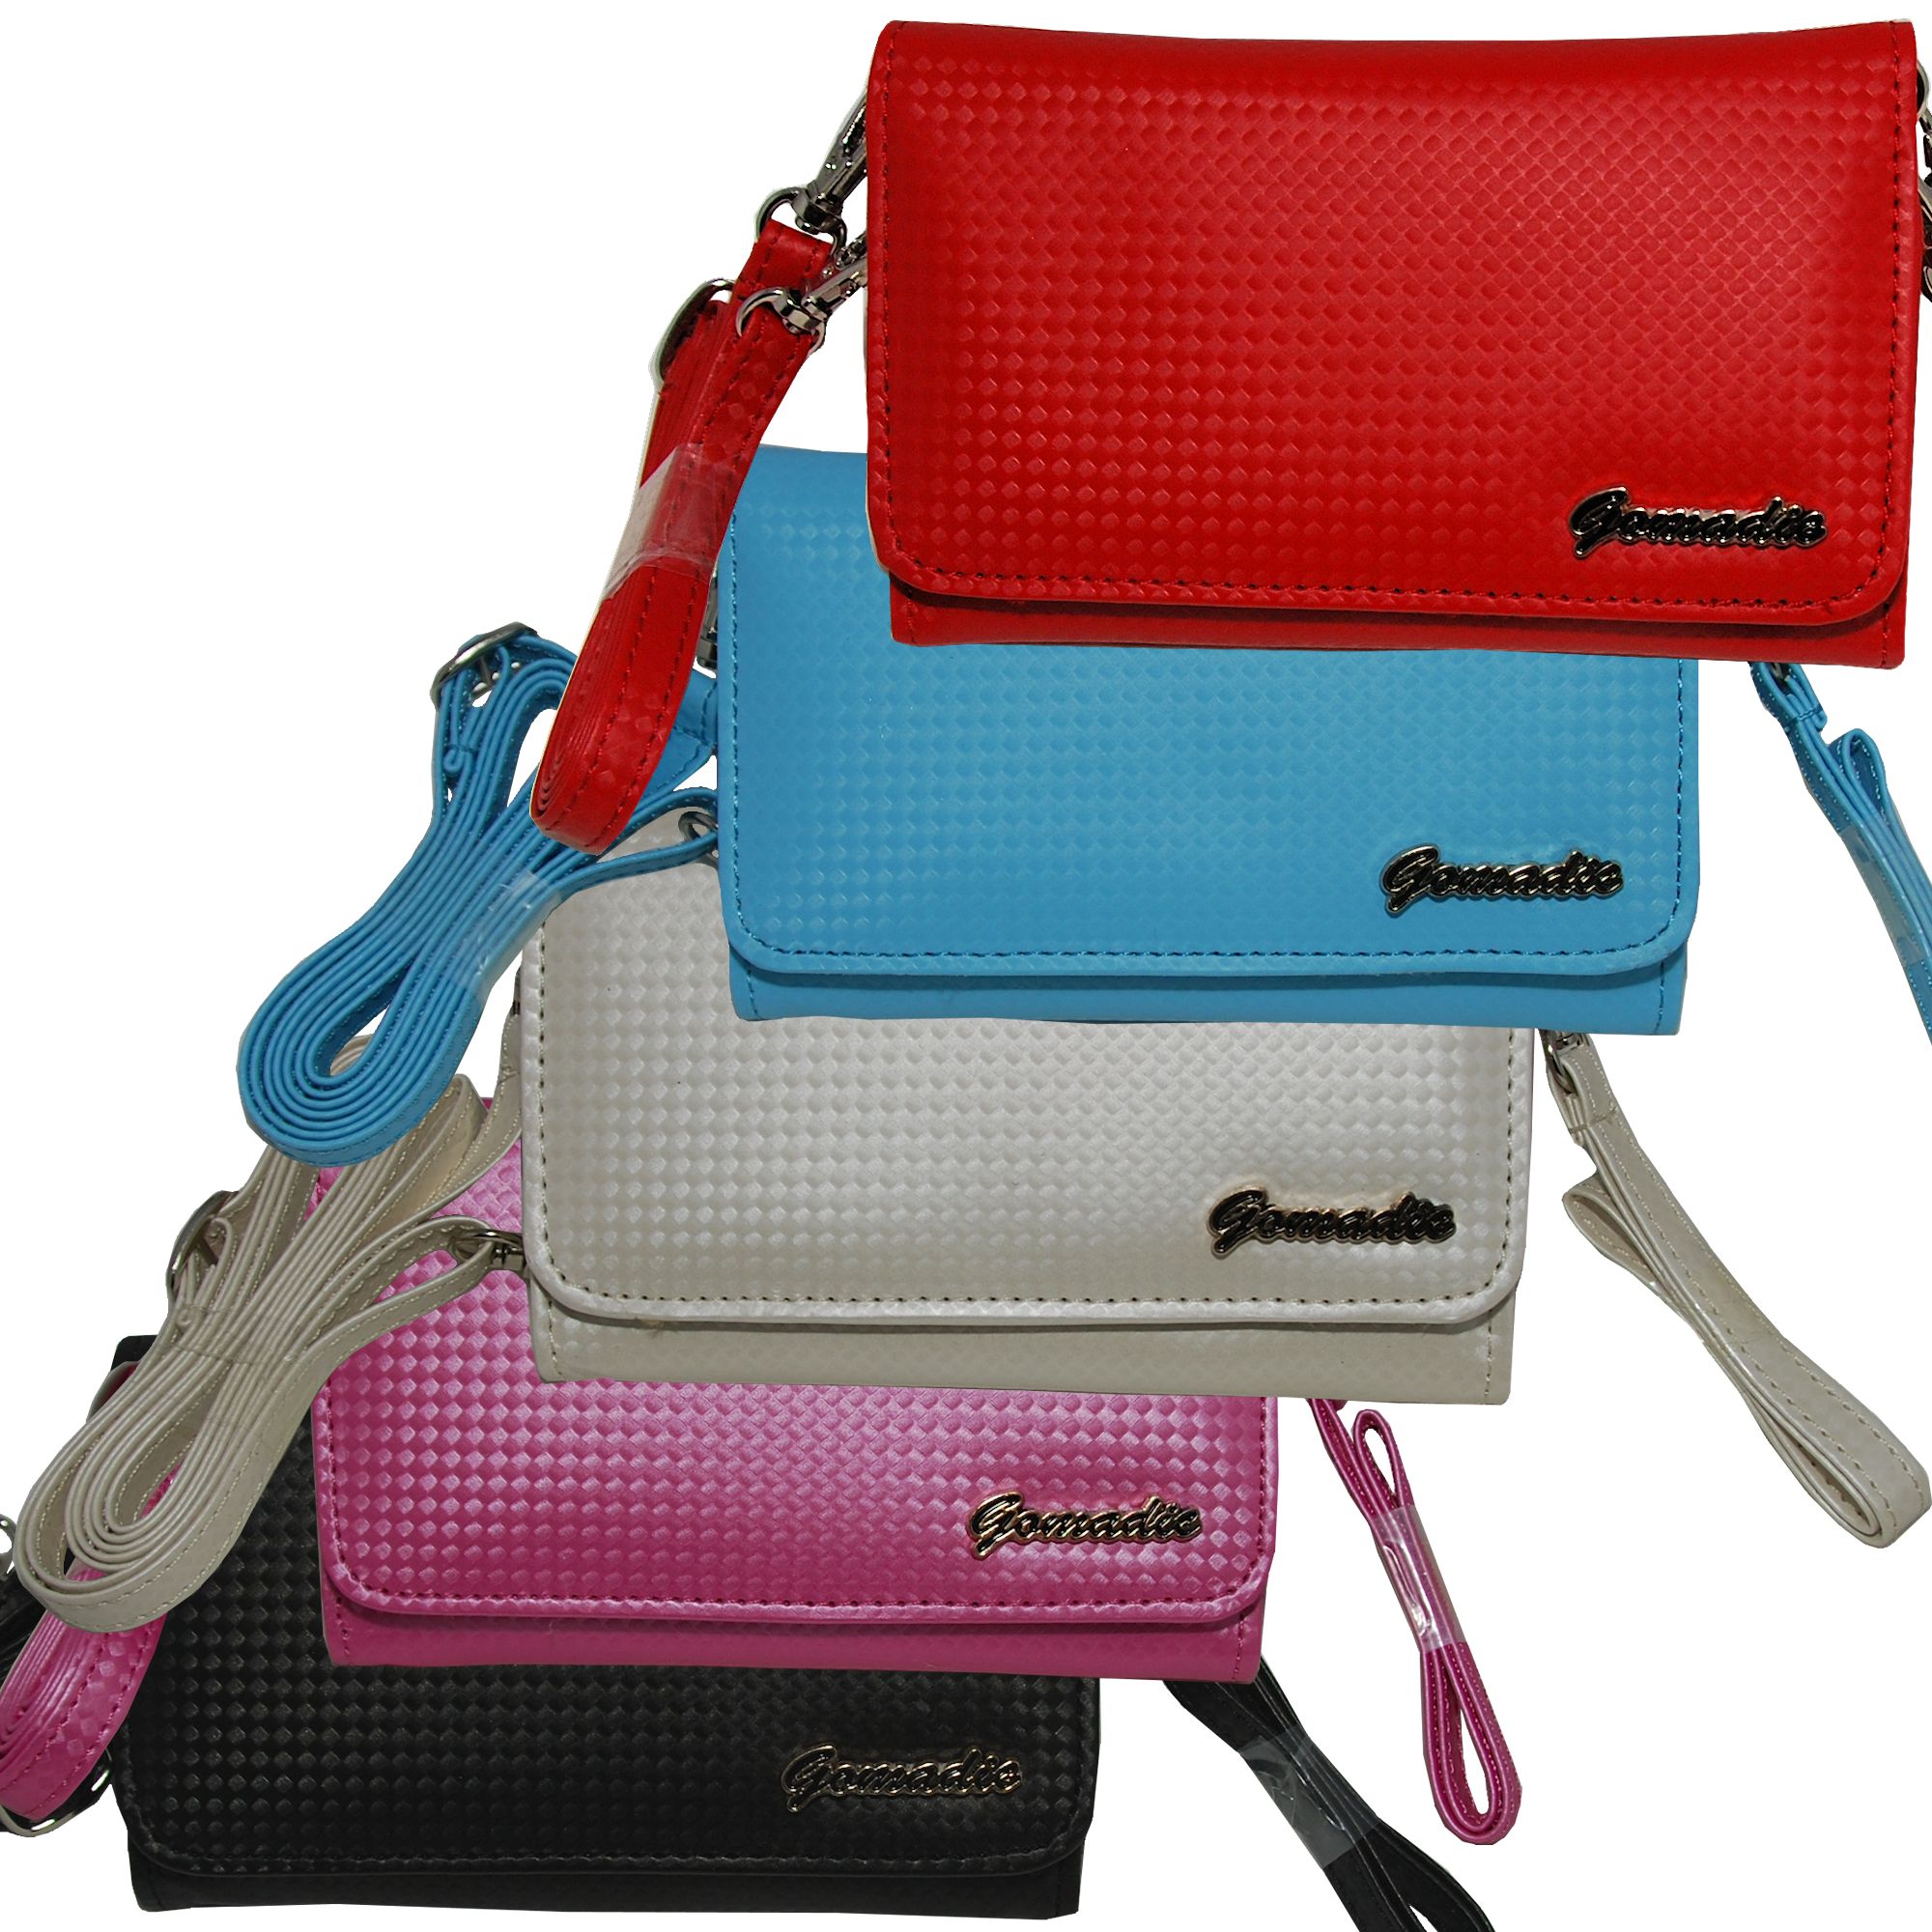 Purse Handbag Case for the Nokia 2720 2760  - Color Options Blue Pink White Black and Red